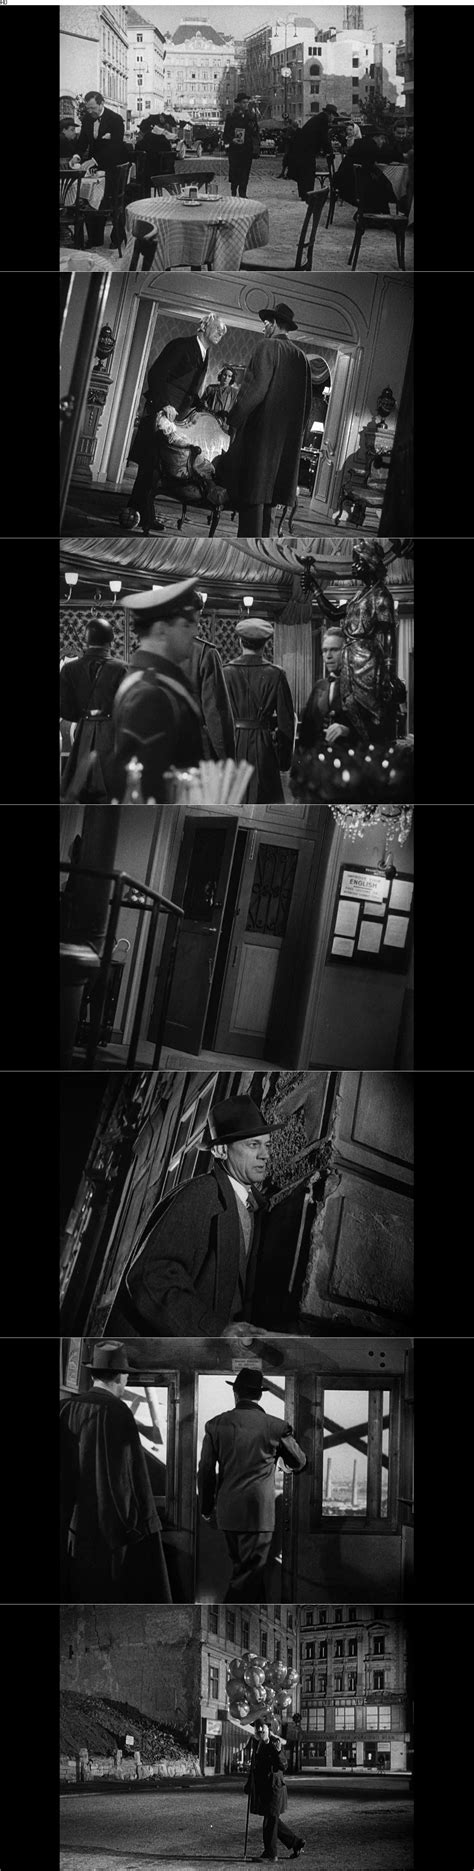 The Third Man 1949 The Criterion Collection Avaxhome